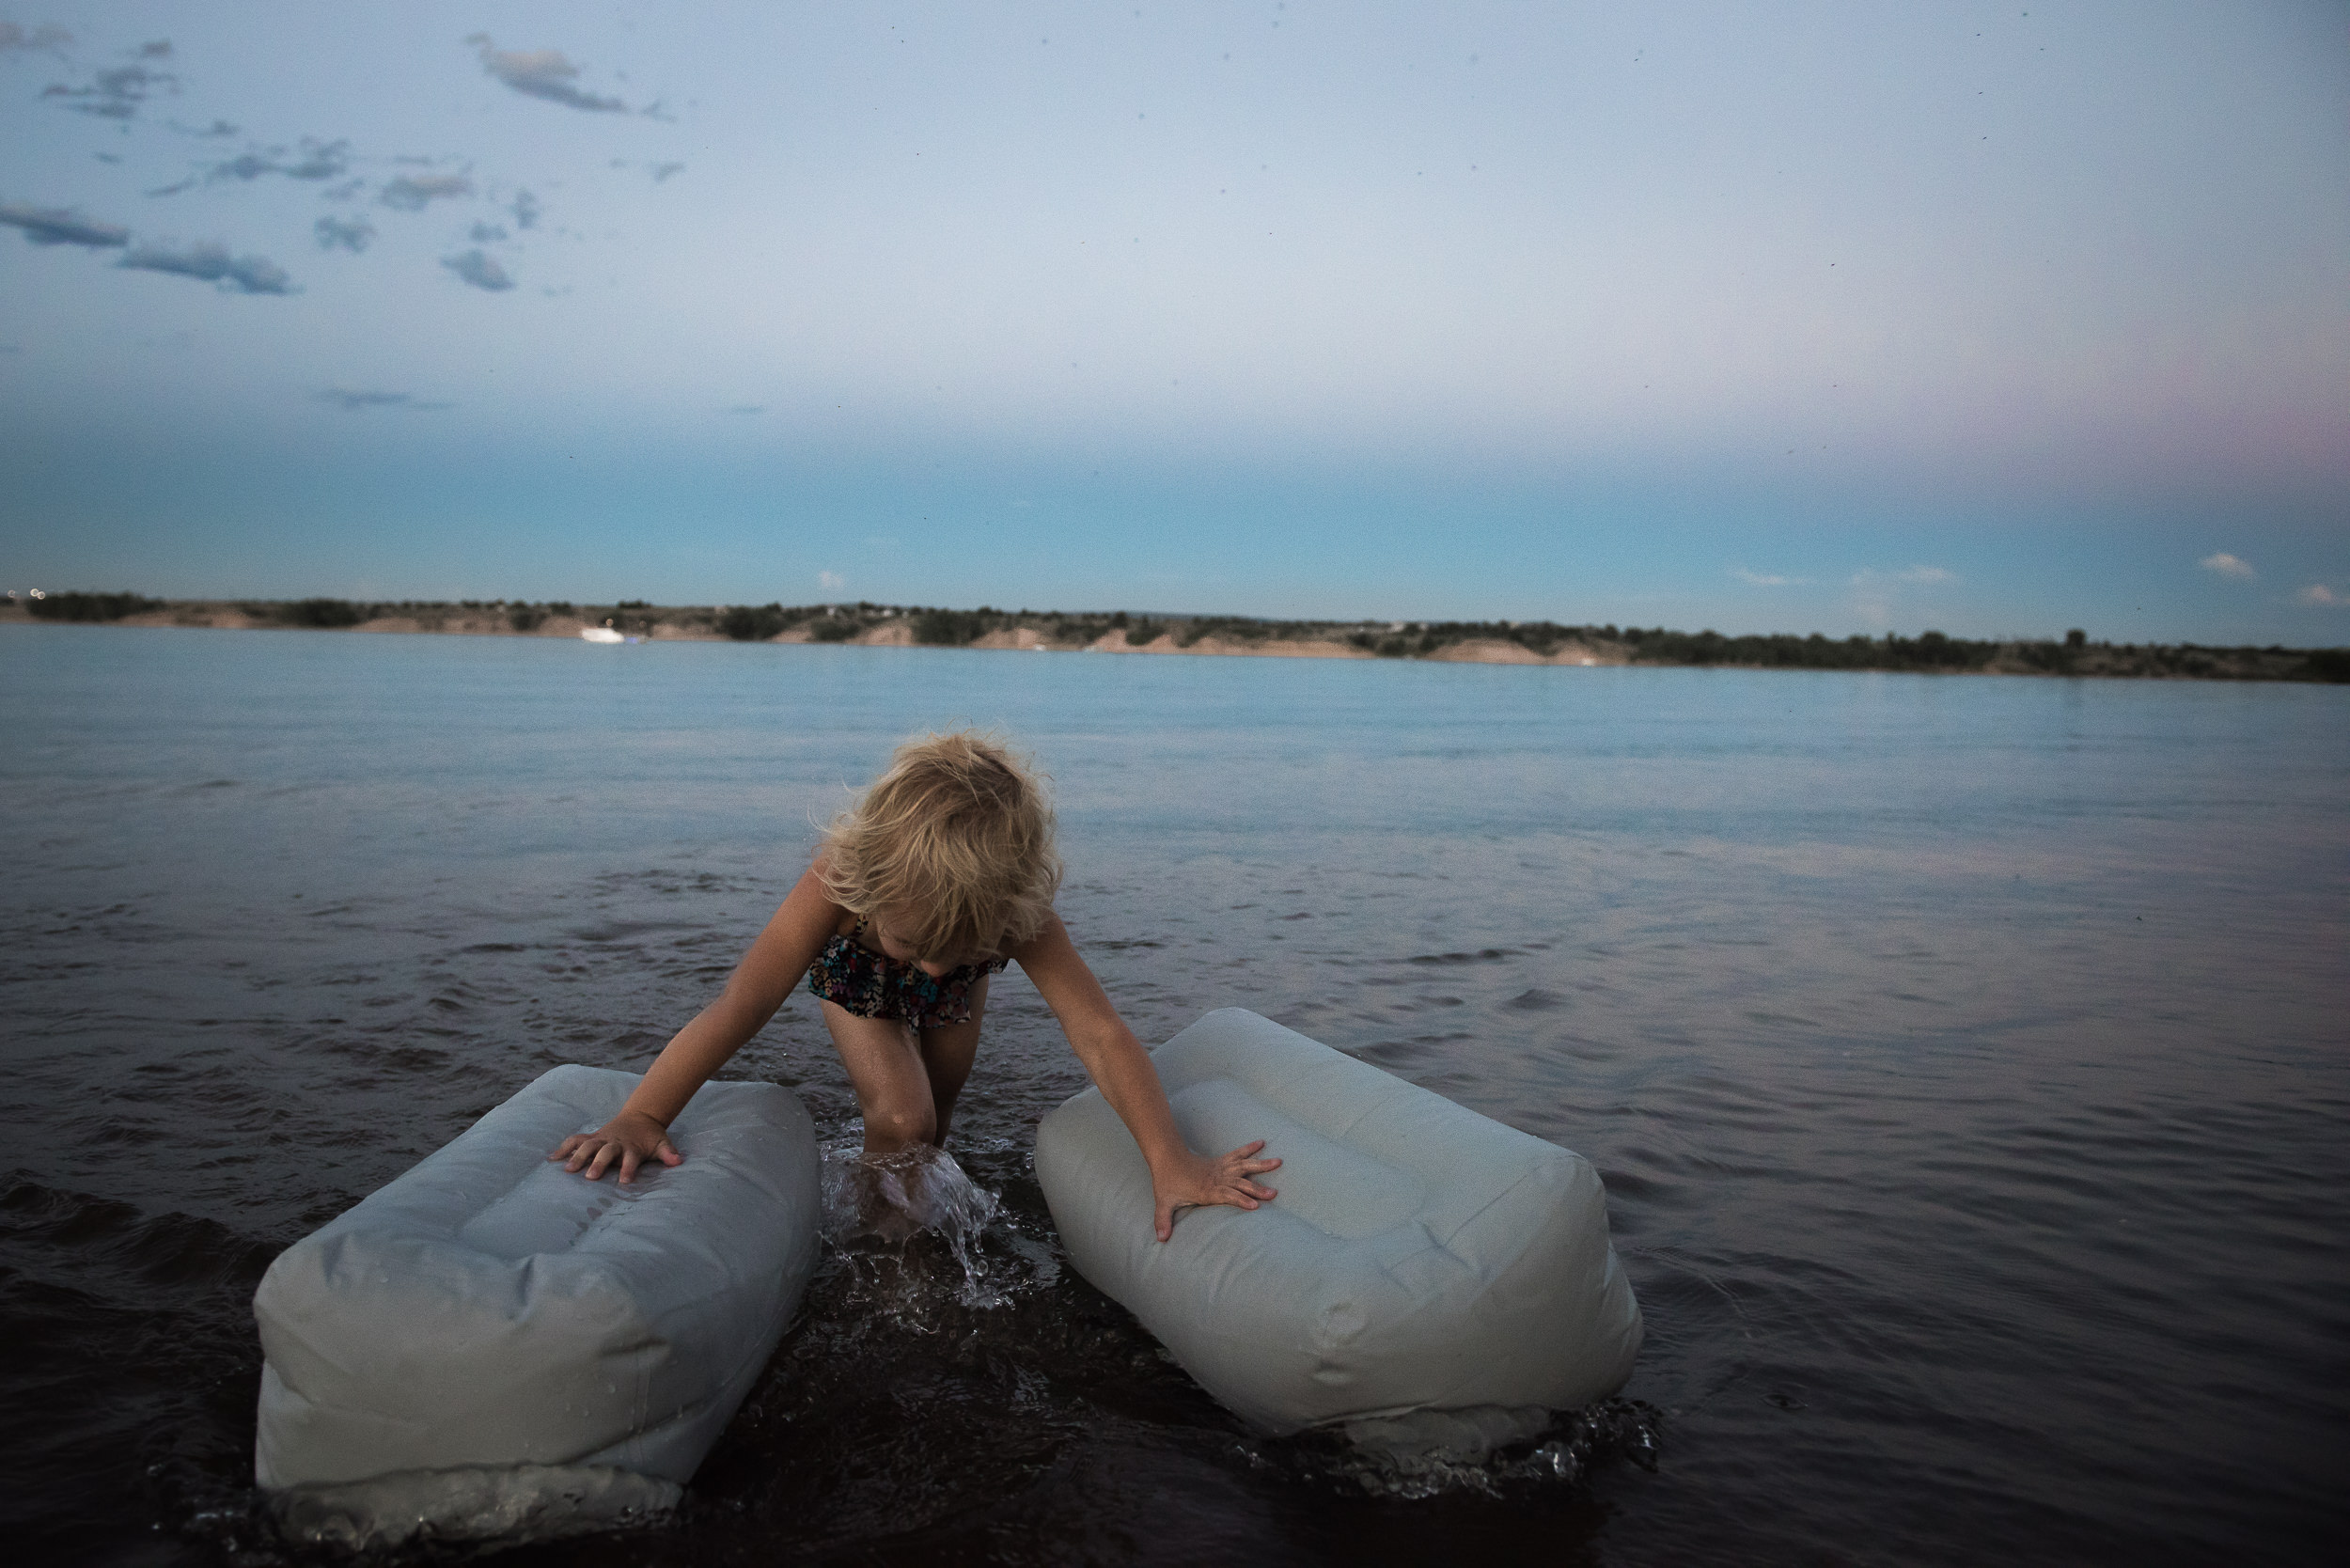 Blog - The Pen & Camera - Molly Rees Photo - Documentary Childhood Photography - girl at night in water at Chatfield Reservoir in Denver, Colorado by M. Menschel